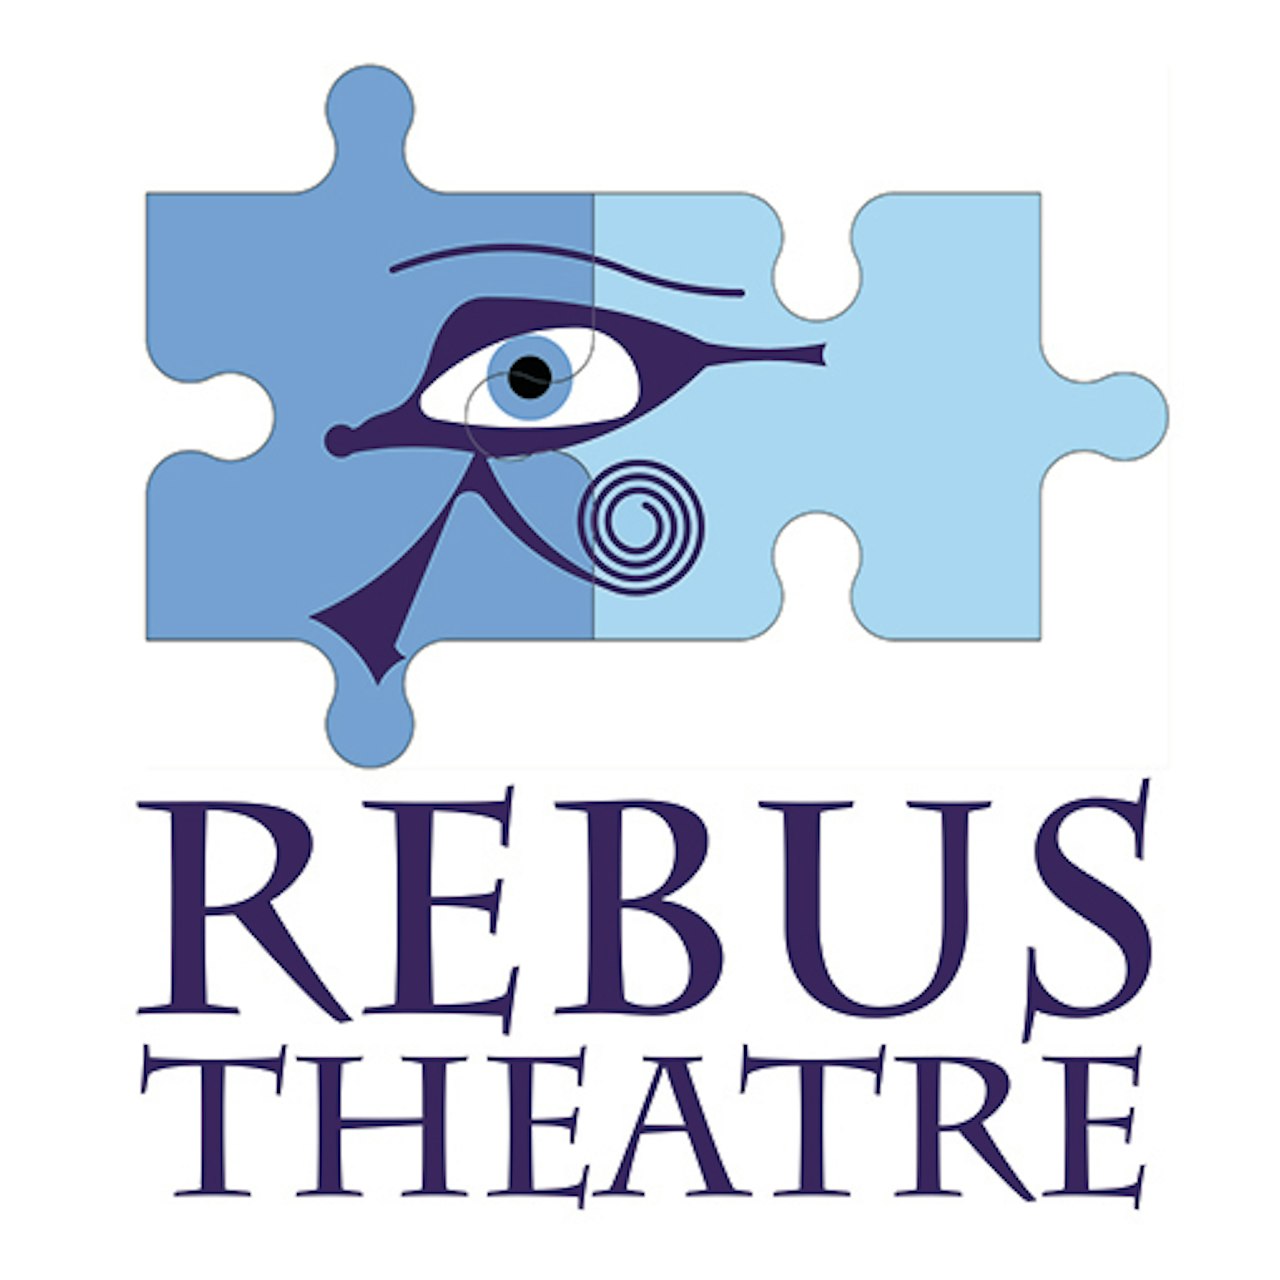 Rebus Theatre Stacked Purple Writing Option 1